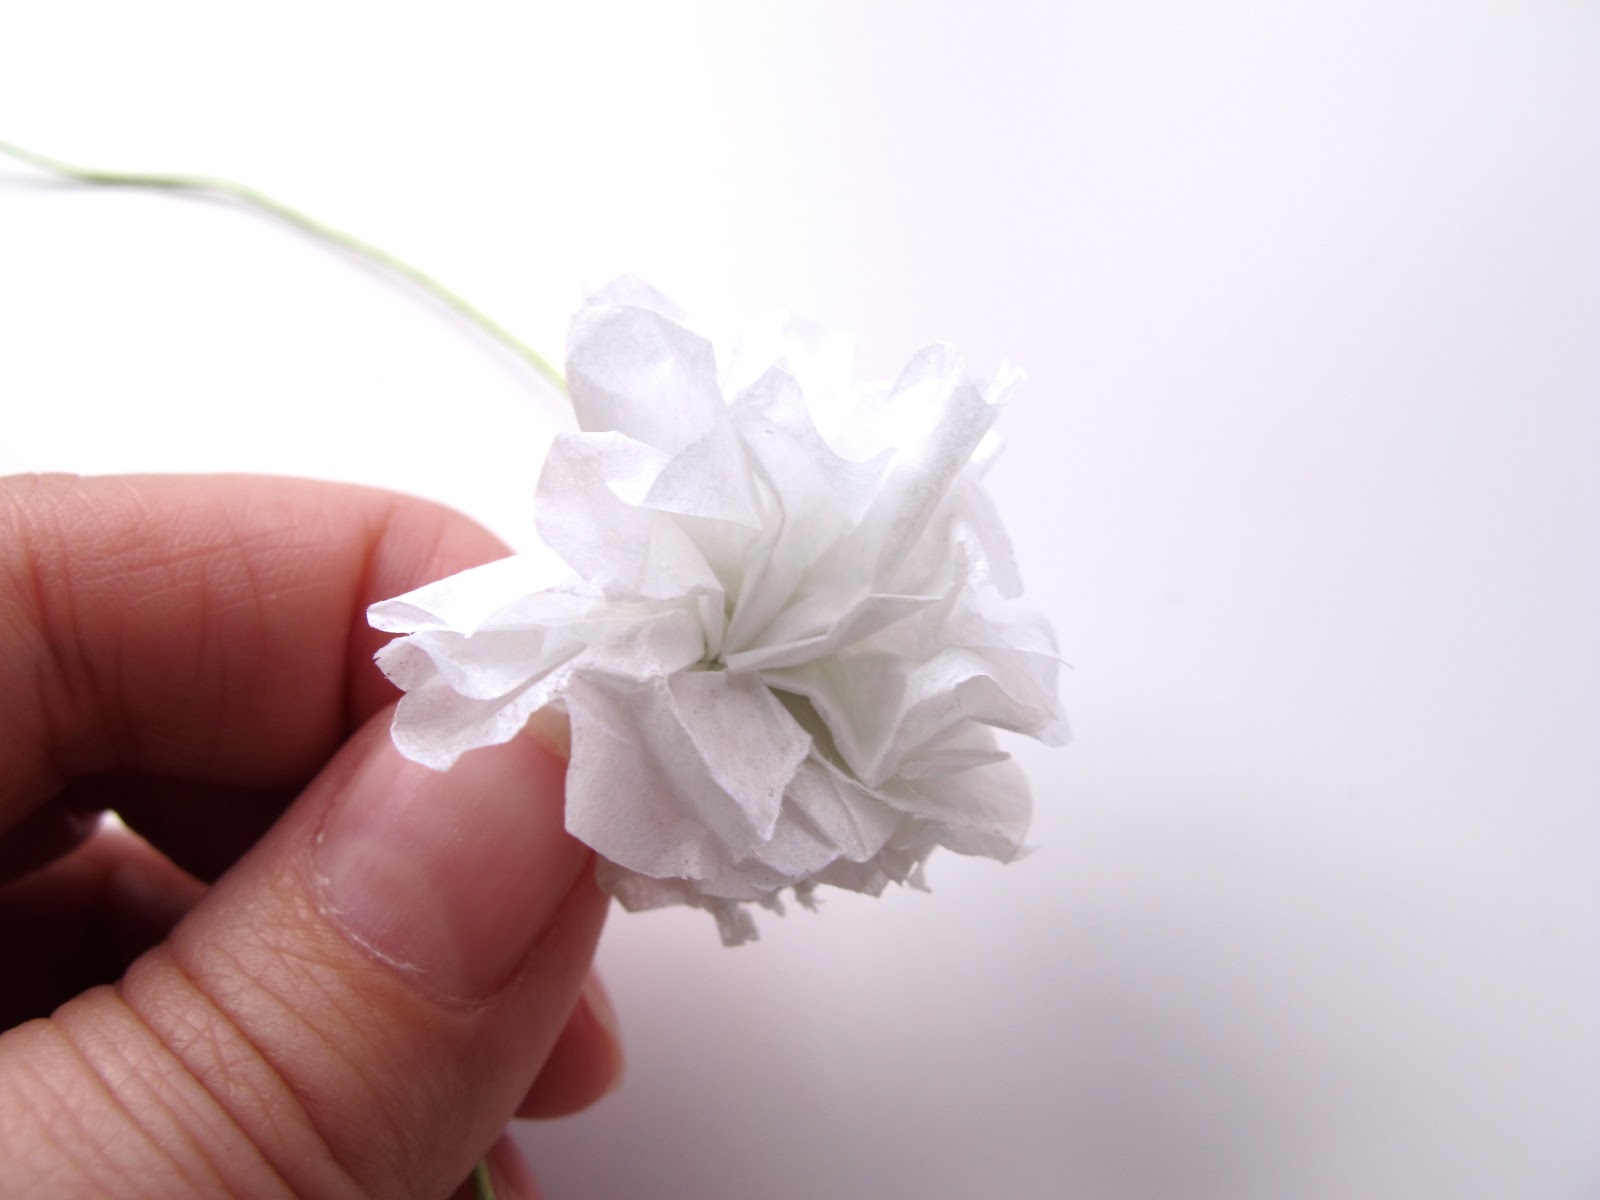 ... & fluffing until your paper resembles a small blossom flower